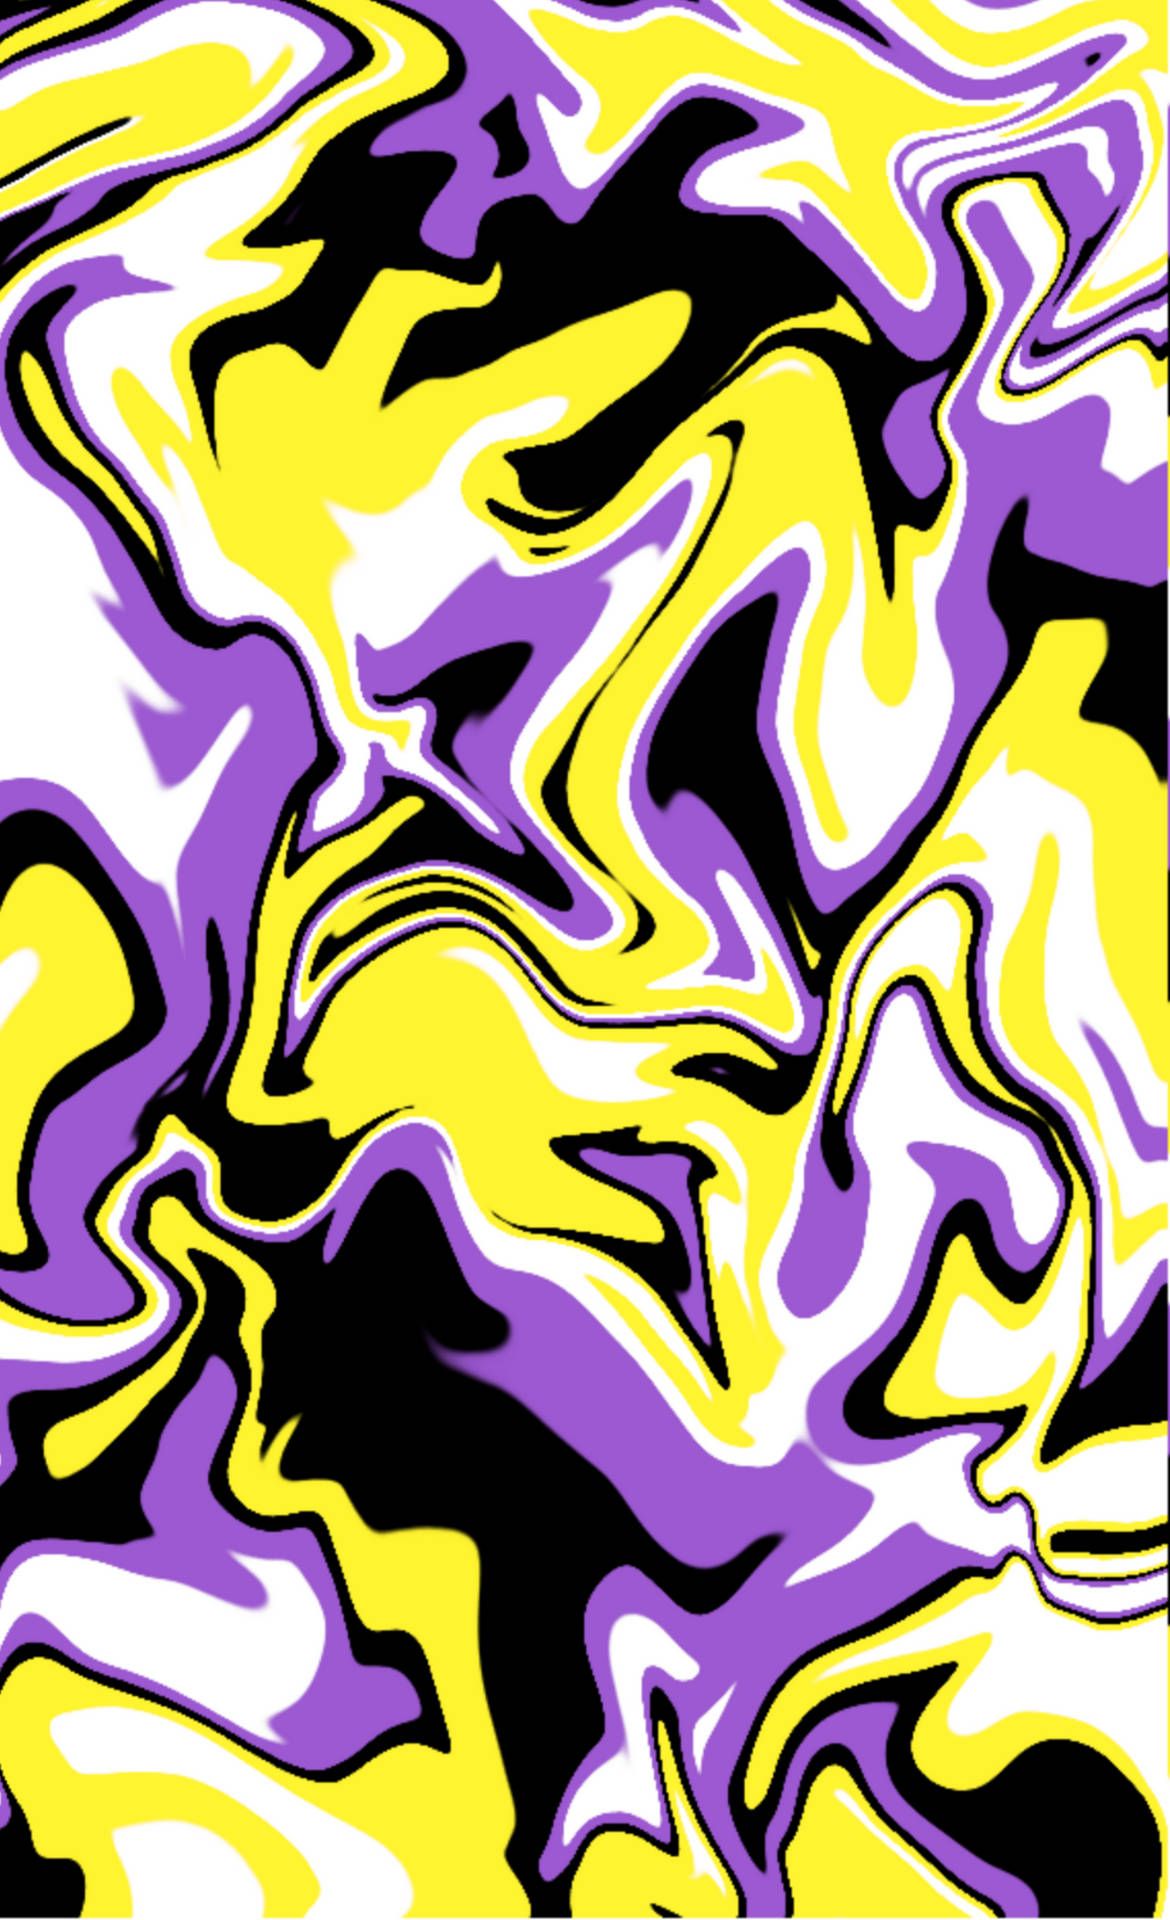 A yellow and purple abstract pattern - Non binary